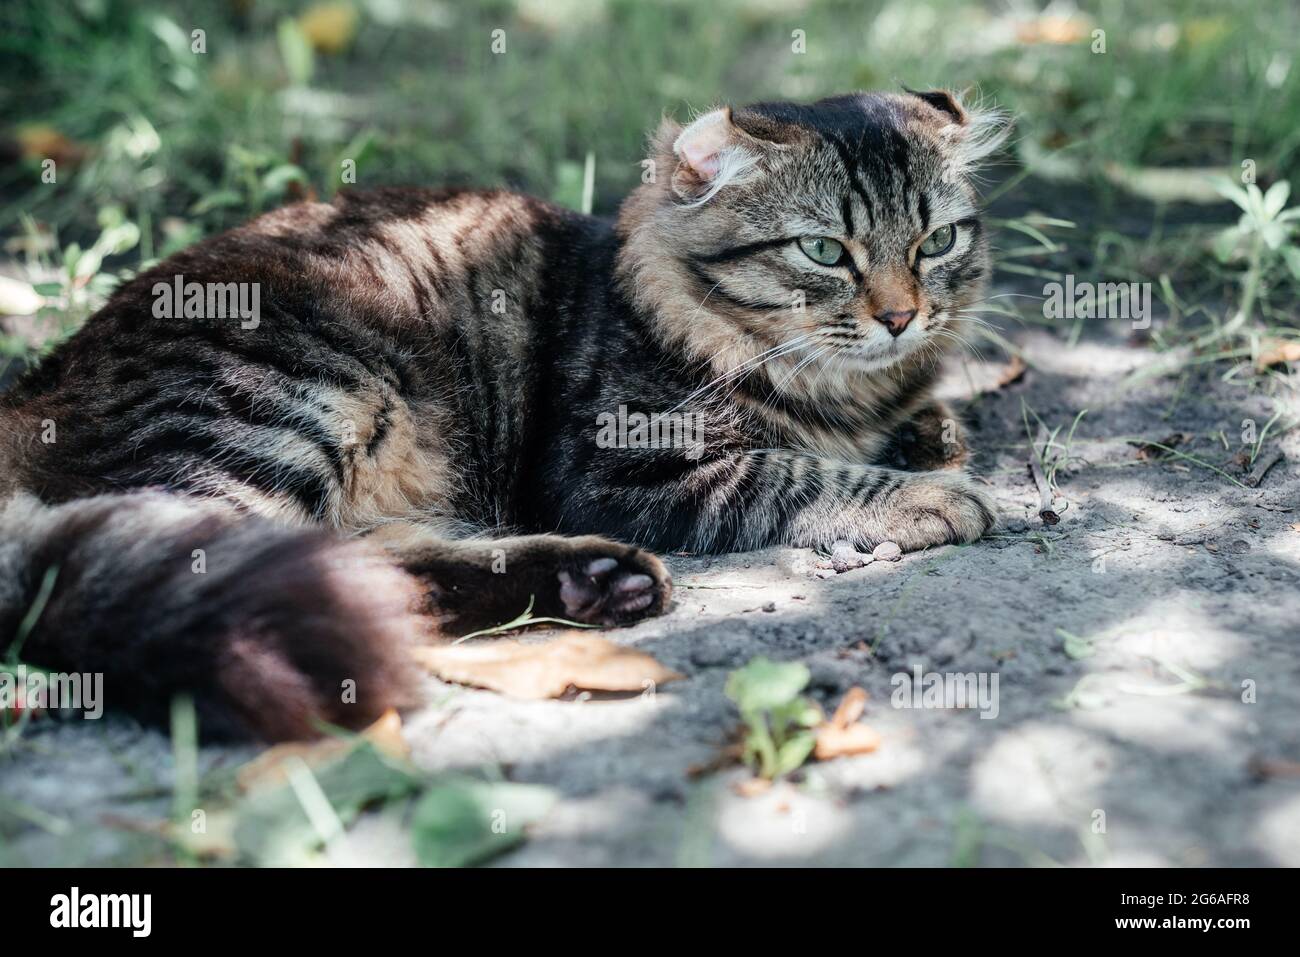 Grey striped cat napping on the green grass Stock Photo